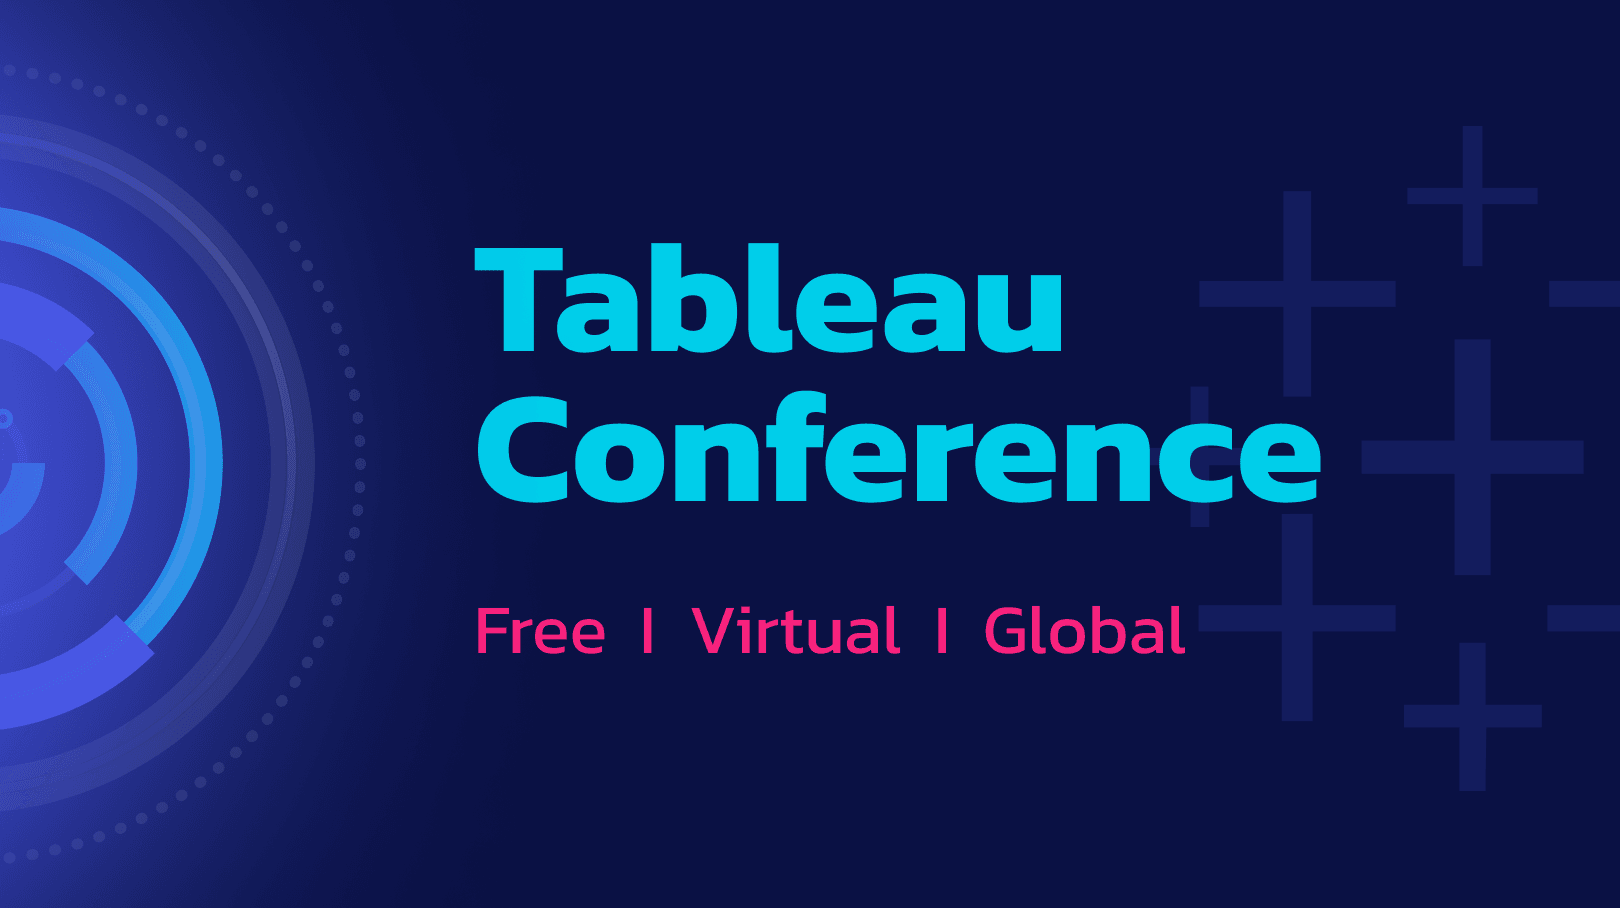 Product Tableau Features Announced in 2021 Conference Opening Keynote - Action Analytics image